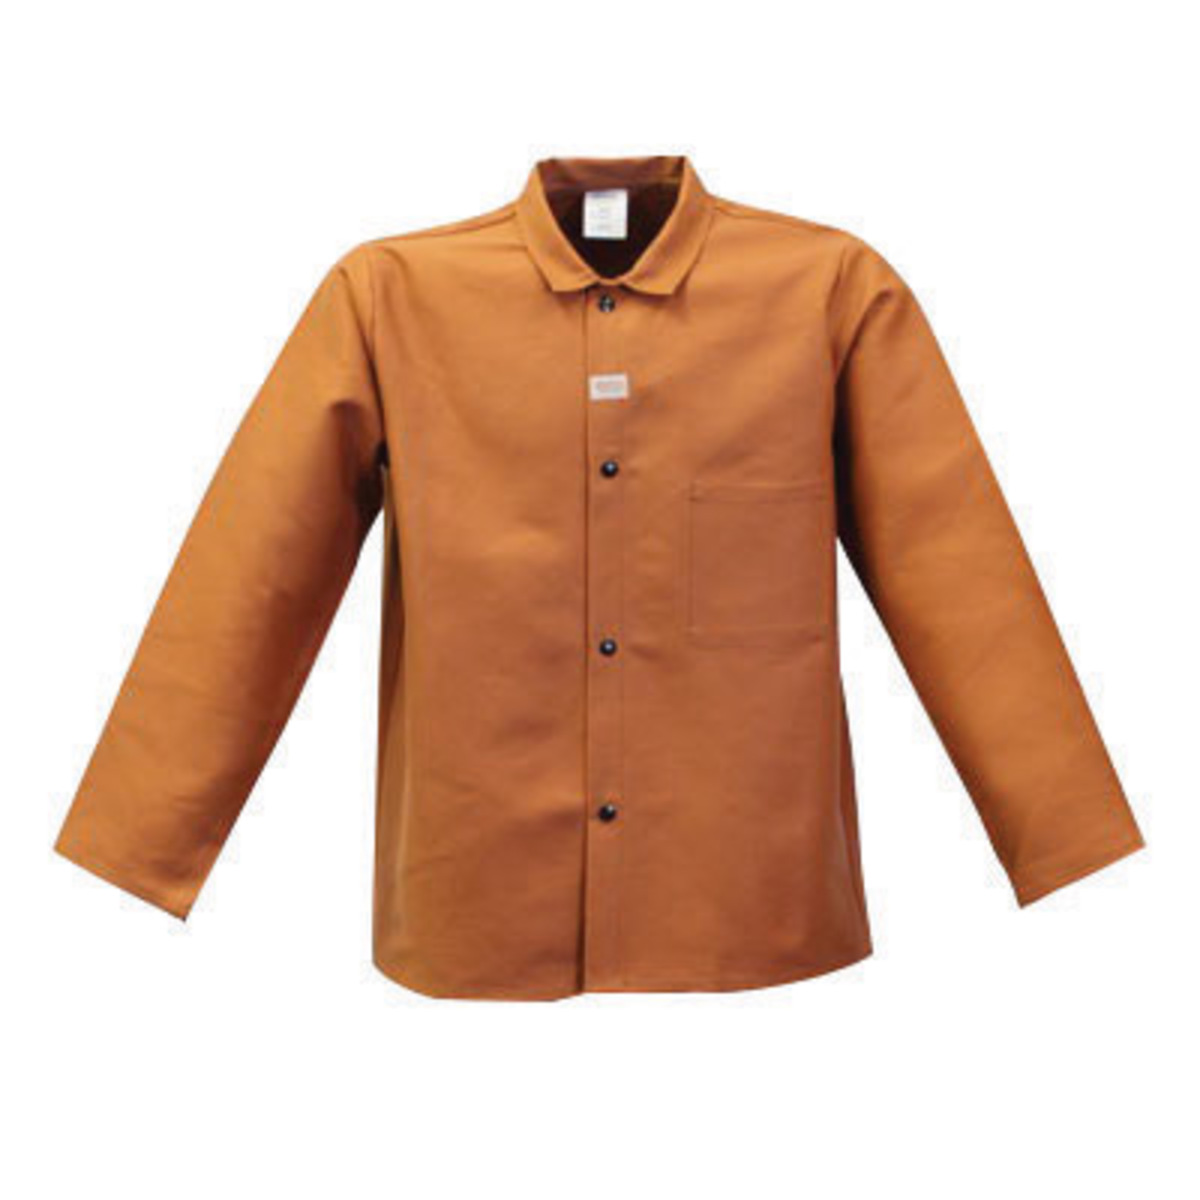 Stanco Safety Products™ Size 2X Rust Brown Cotton Flame Resistant Welding Jacket With Snap Closure